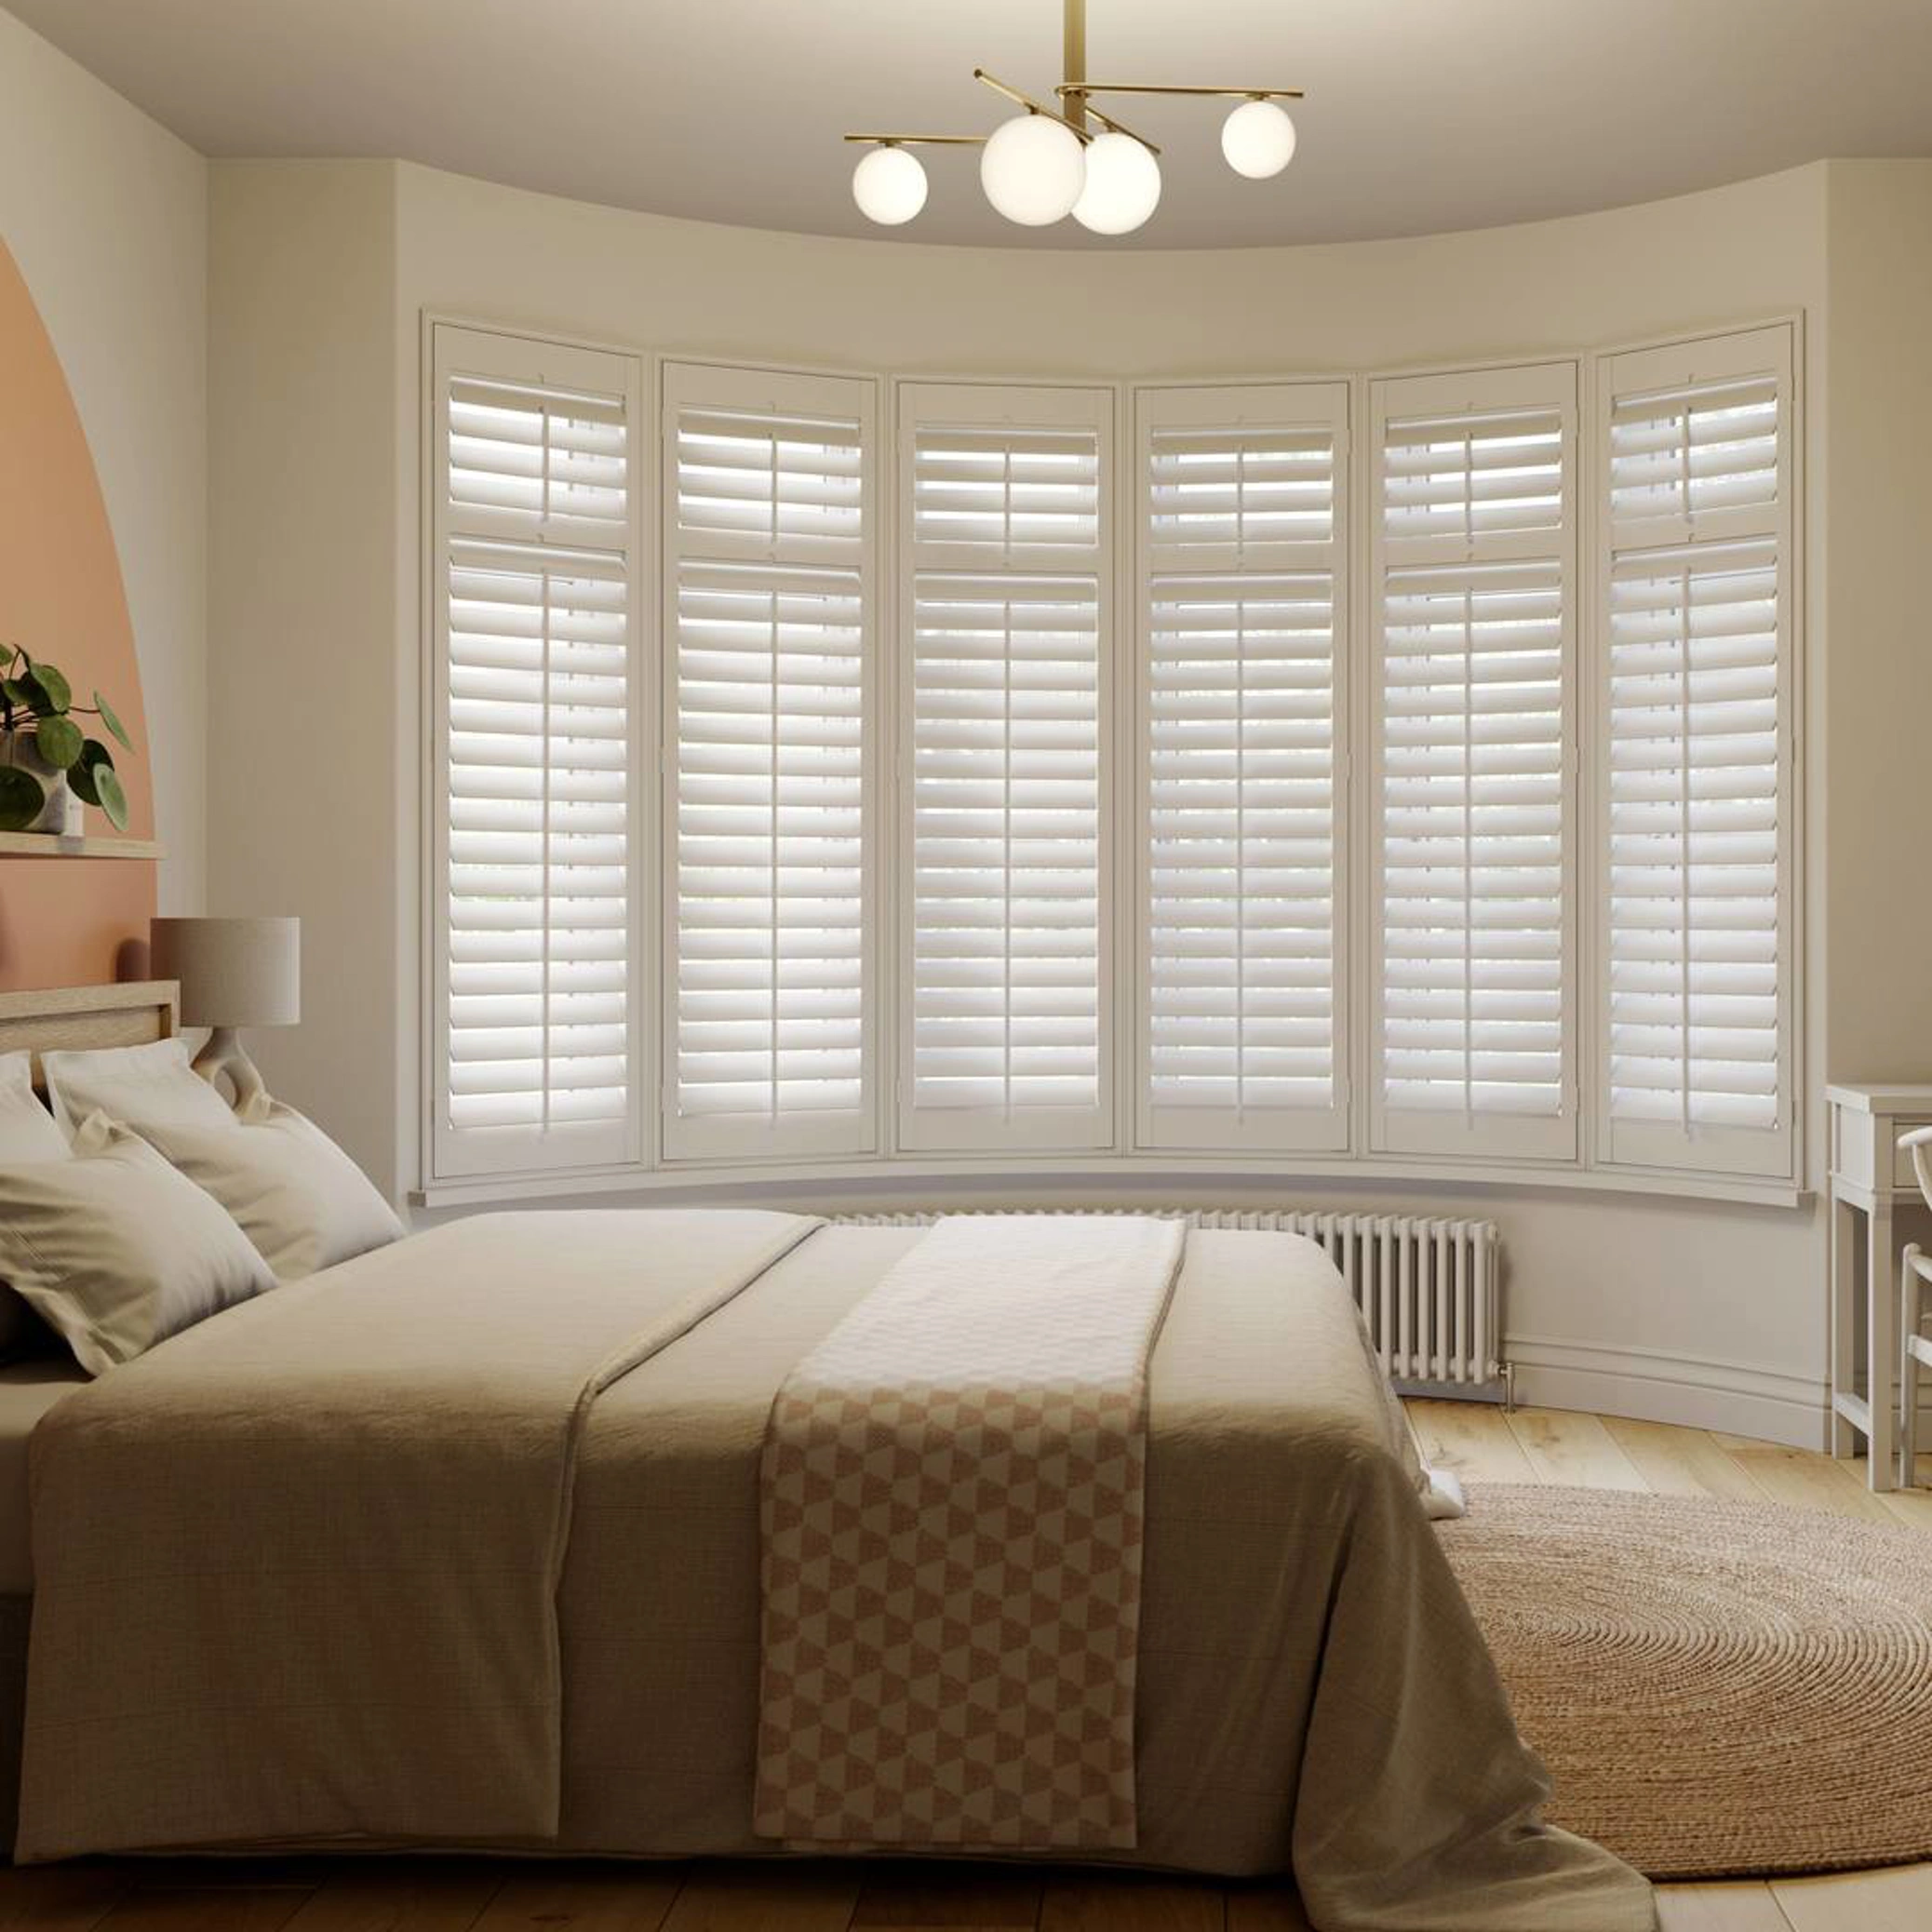 Vivid White wooden shutters in a curved bay and neutral bedroom